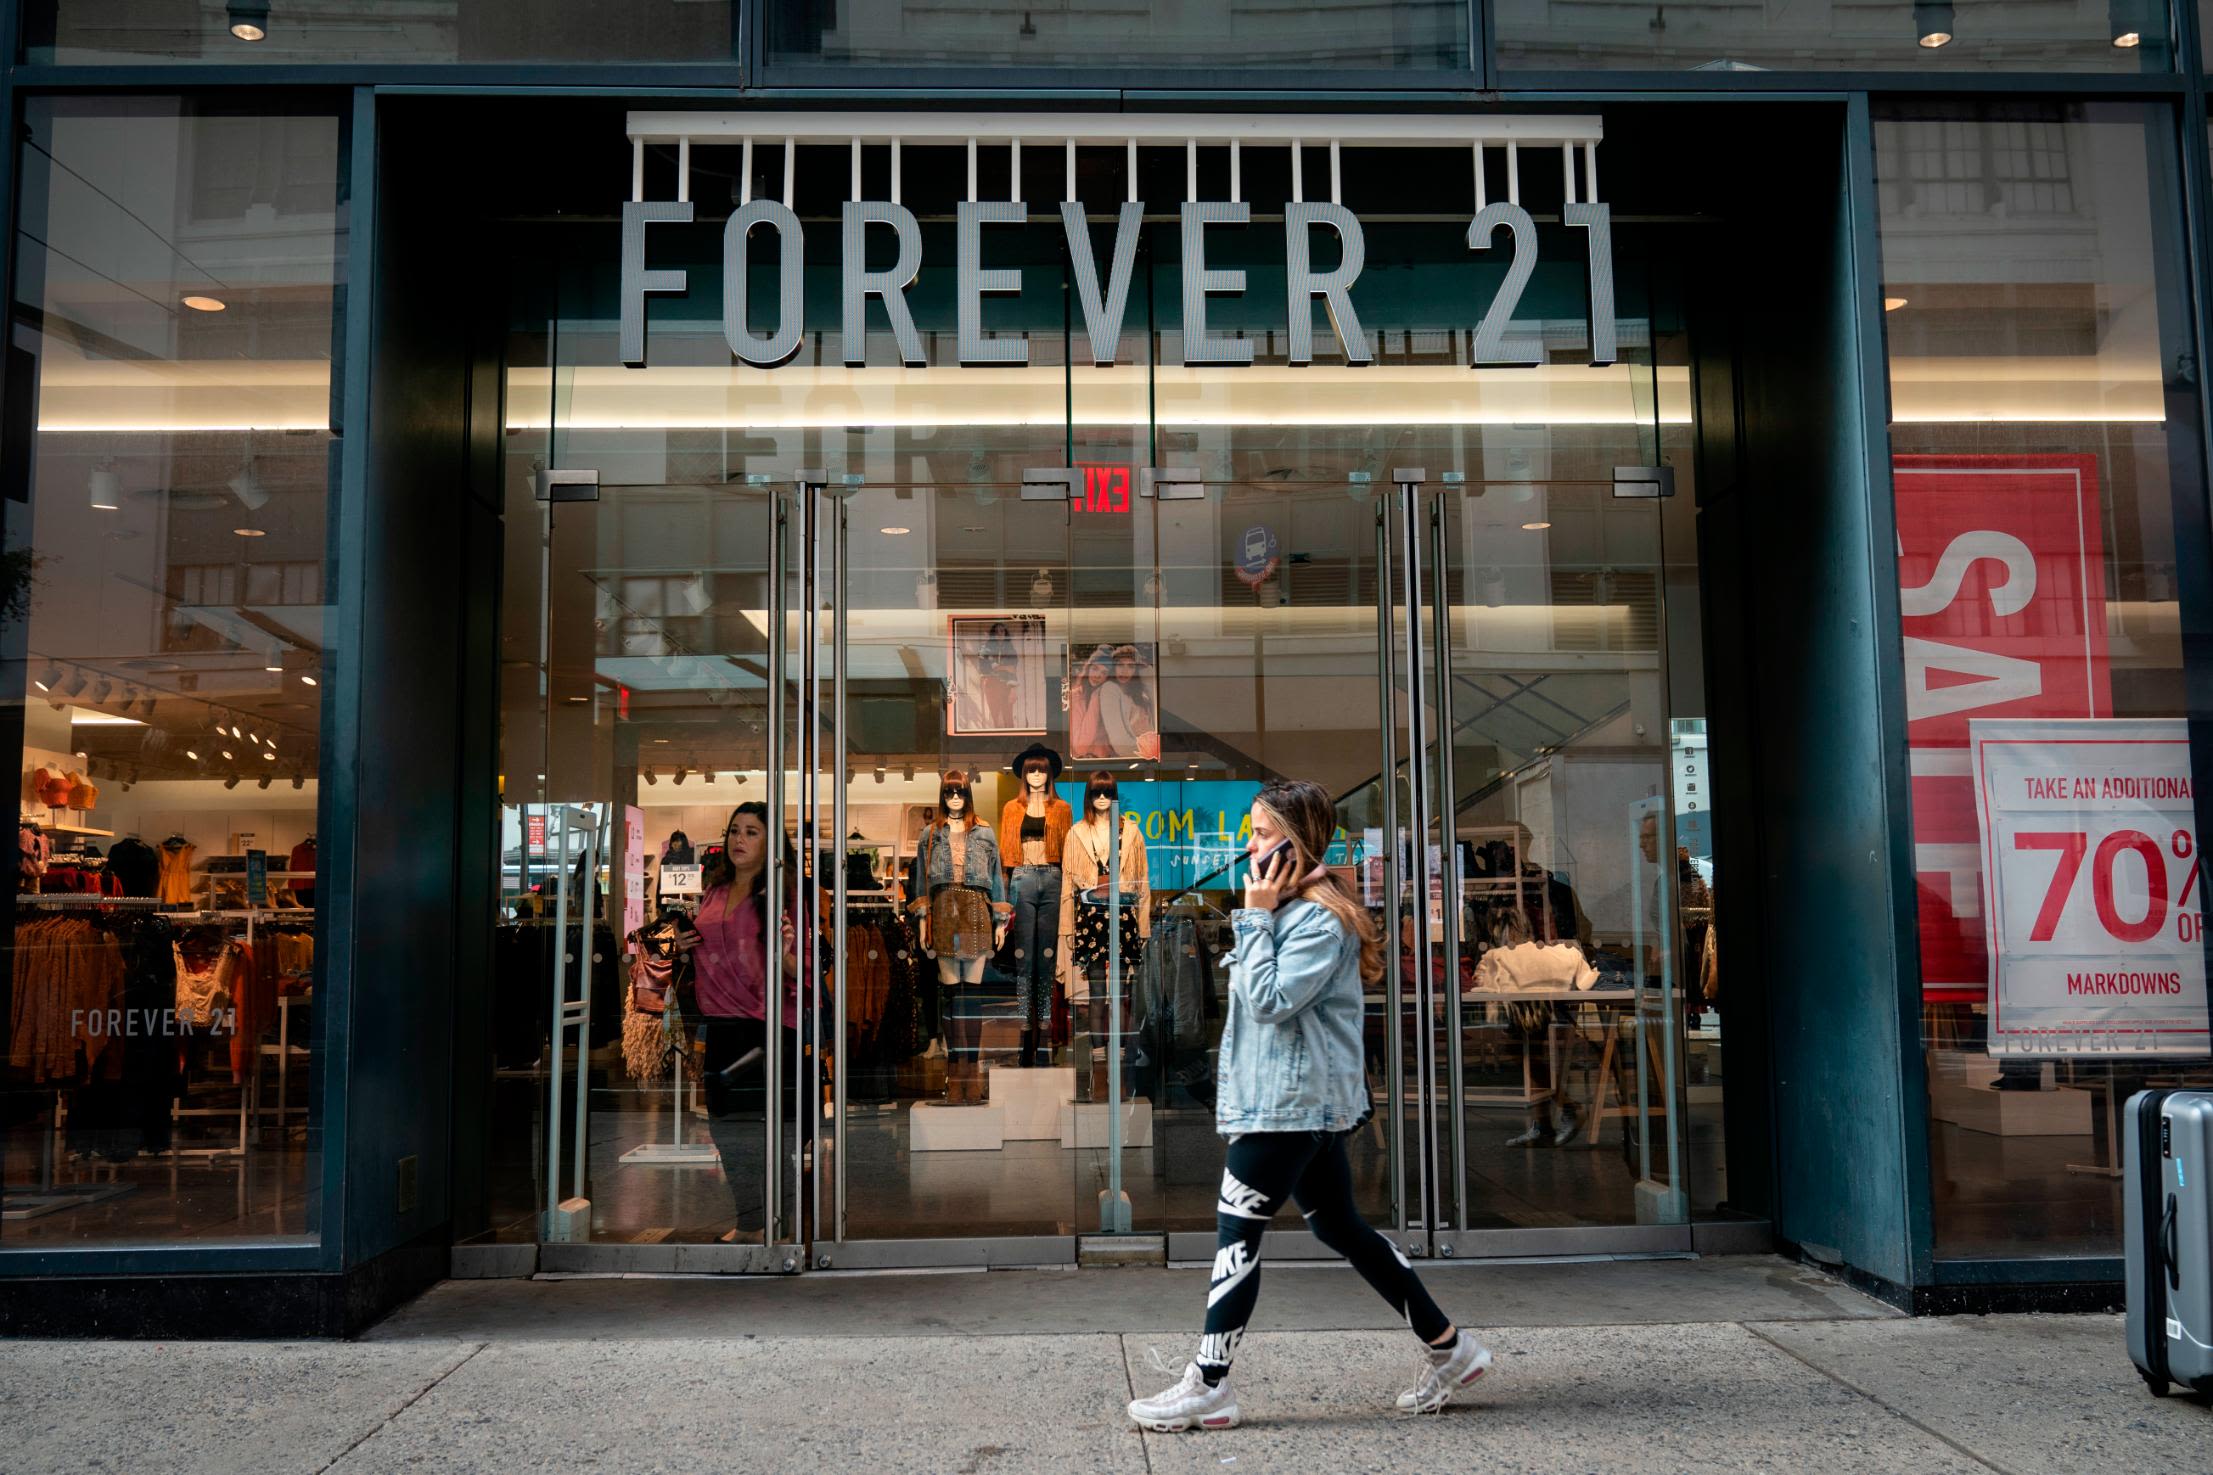 Bankrupt: a brief history of the creator of Forever 21